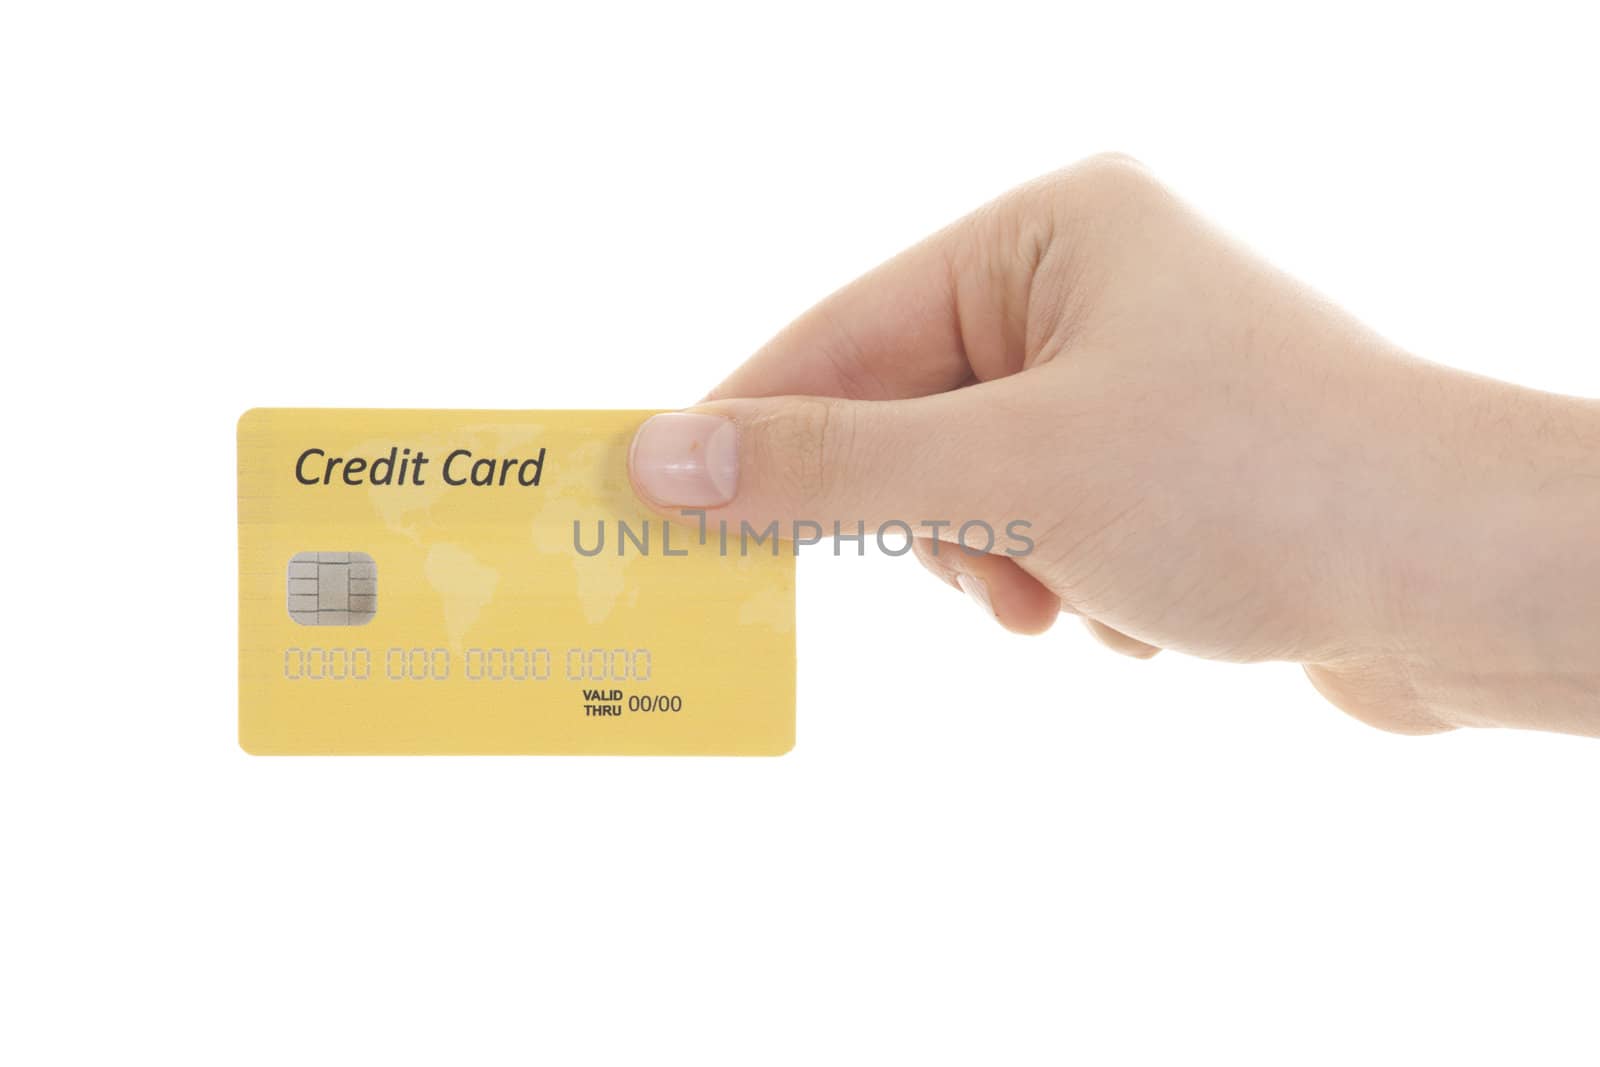 hand with credit card over white background